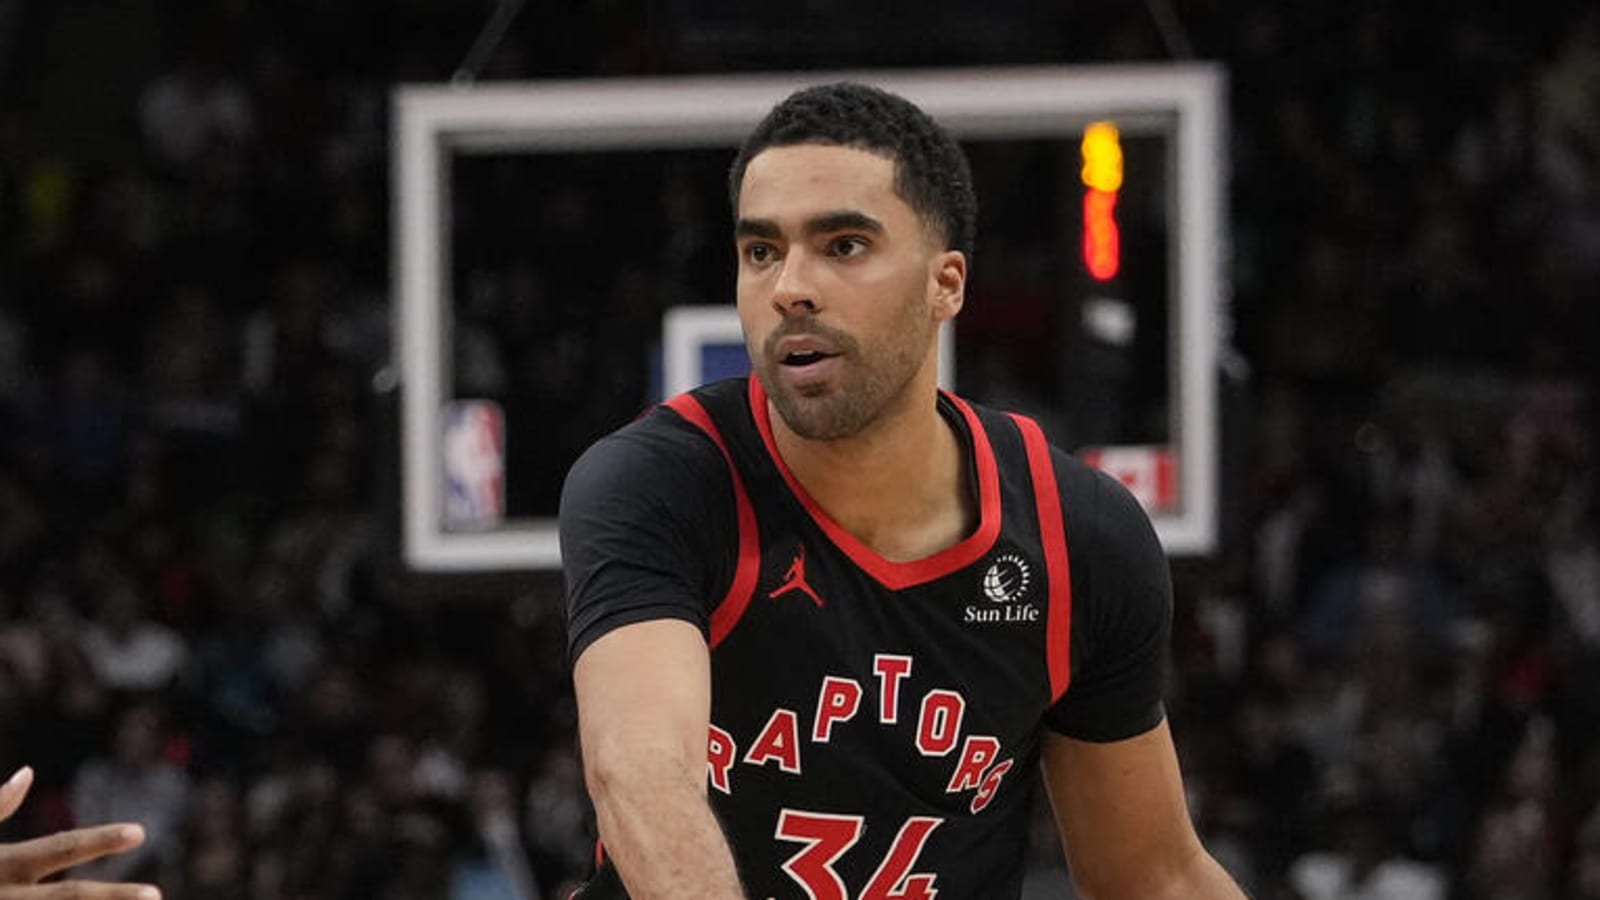 Raptors’ Jontay Porter Banned For Life From NBA After Betting Investigation